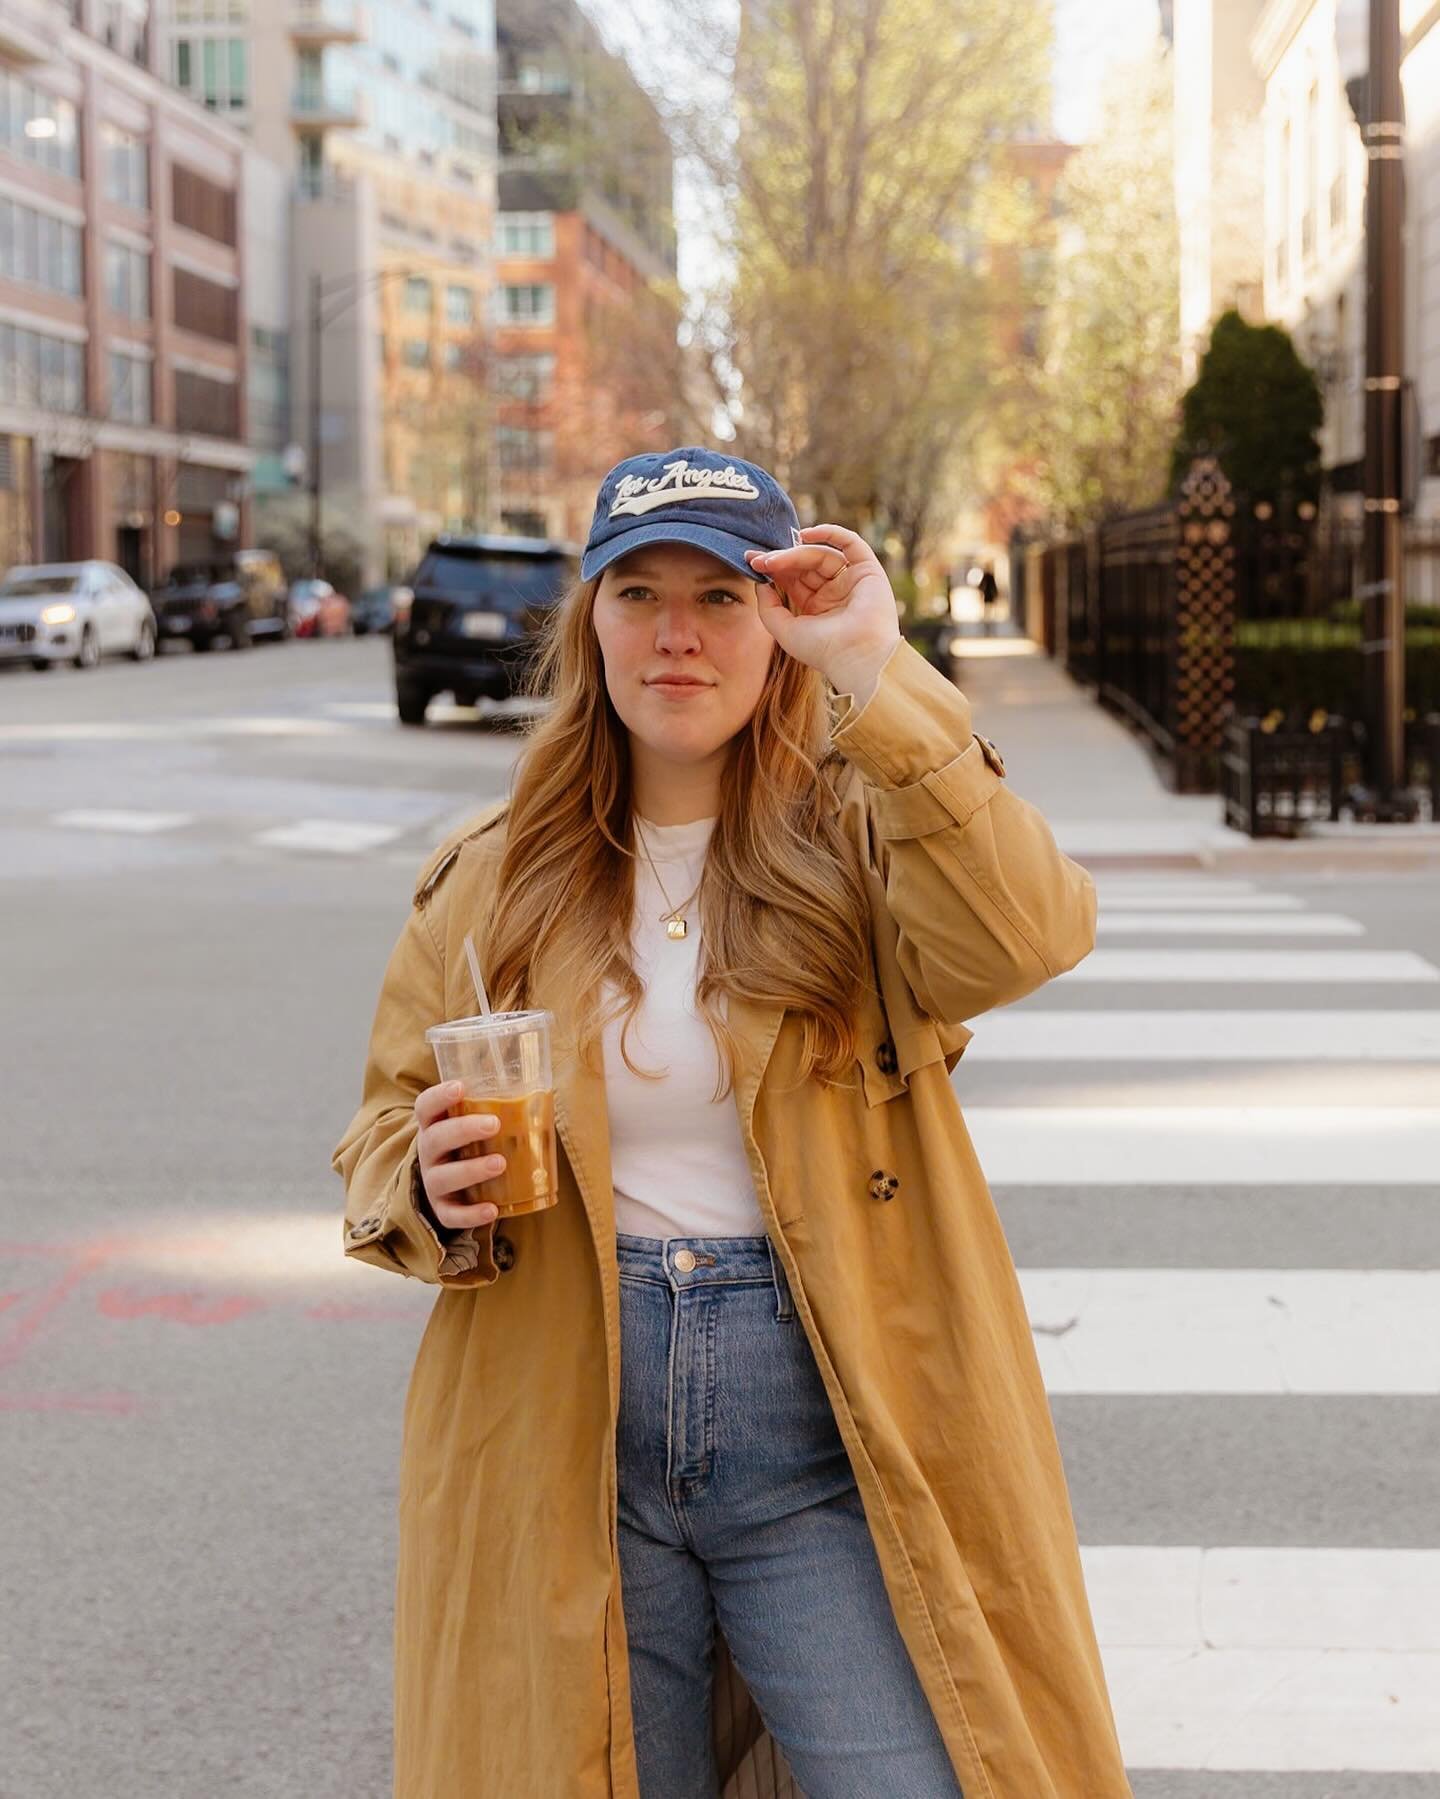 5 tips for spring outfitting 💐

🧥 bite the bullet and invest in a light jacket 
🌦️ become best friends with the weather app 
👡 balance your outfit - if you&rsquo;re wearing pants, opt for a short sleeve or tank. If you&rsquo;re wearing long sleev